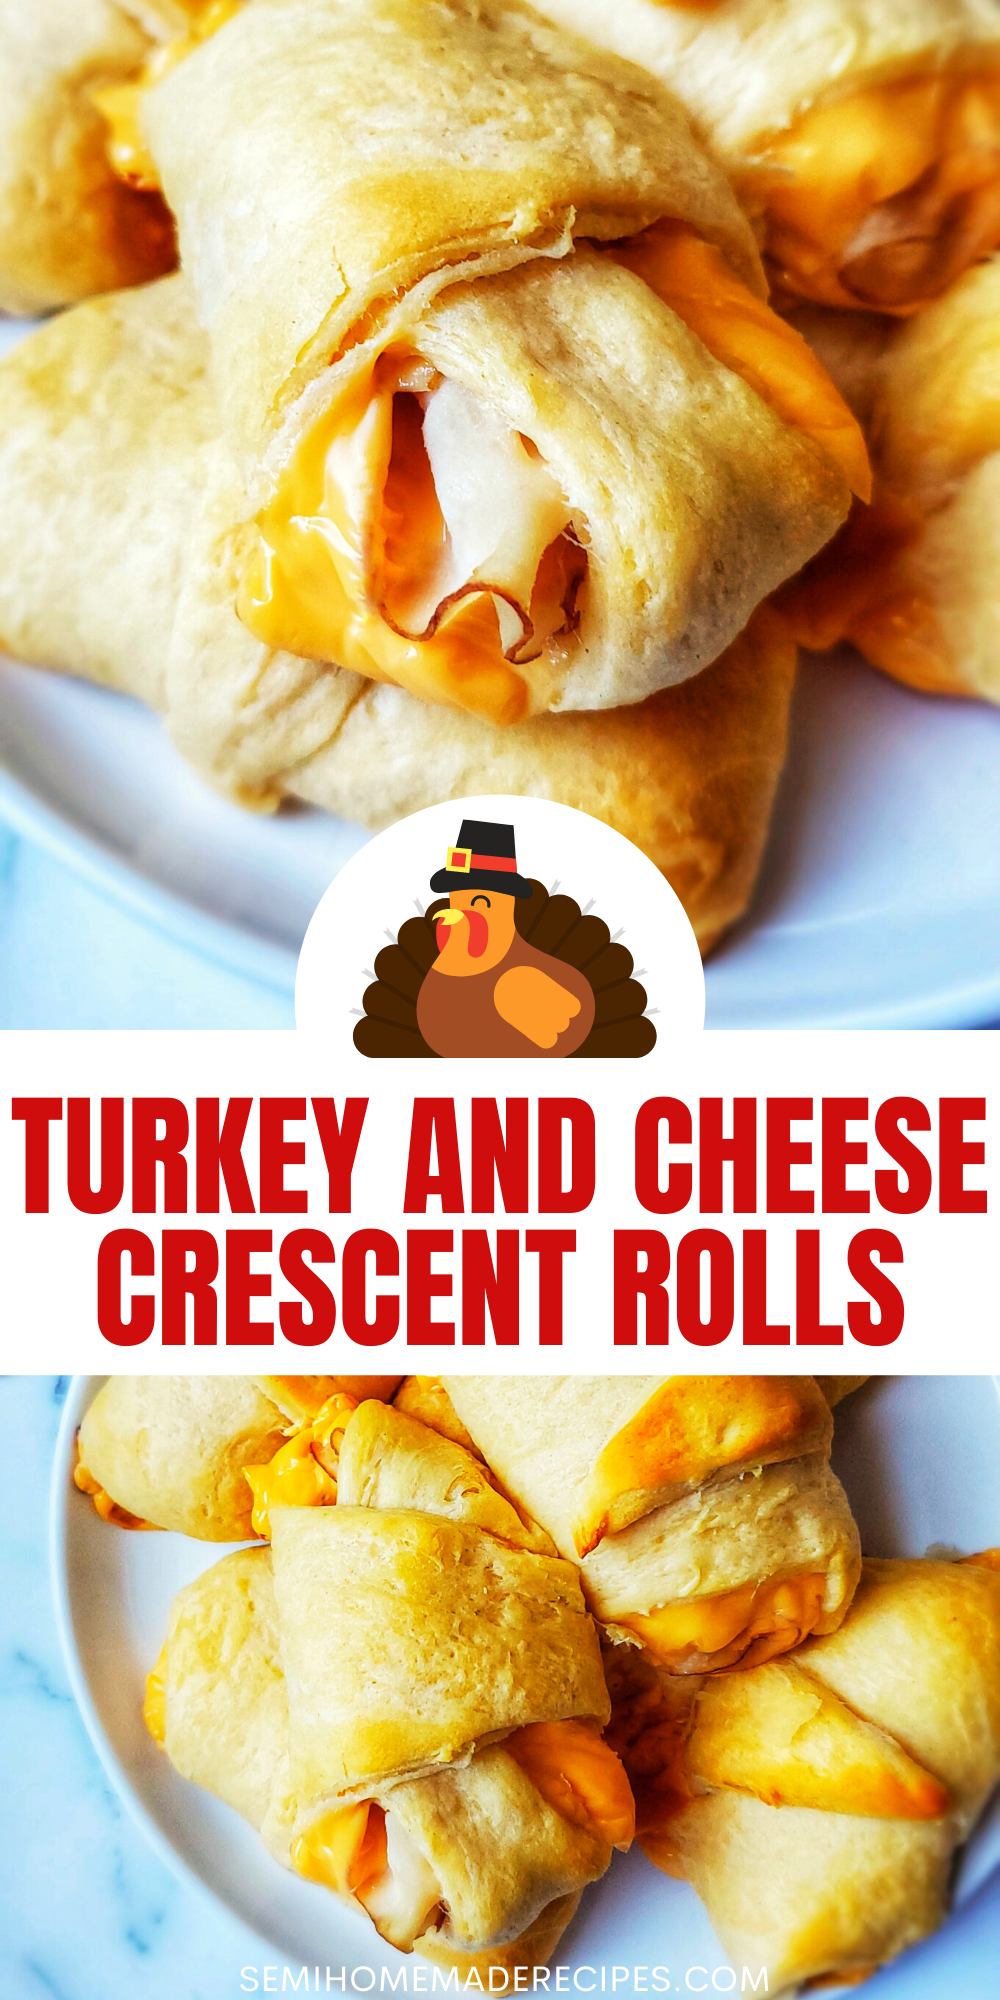  Turkey and Cheese Crescent Rolls - Thin slices of turkey and slices of cheese are rolled into crescent roll dough and baked for the perfect lunch or snack! You can also use shredded cheese for these rolls! I also love using sliced ham, rotisserie chicken, and leftover Thanksgiving turkey for these little sandwiches too! 